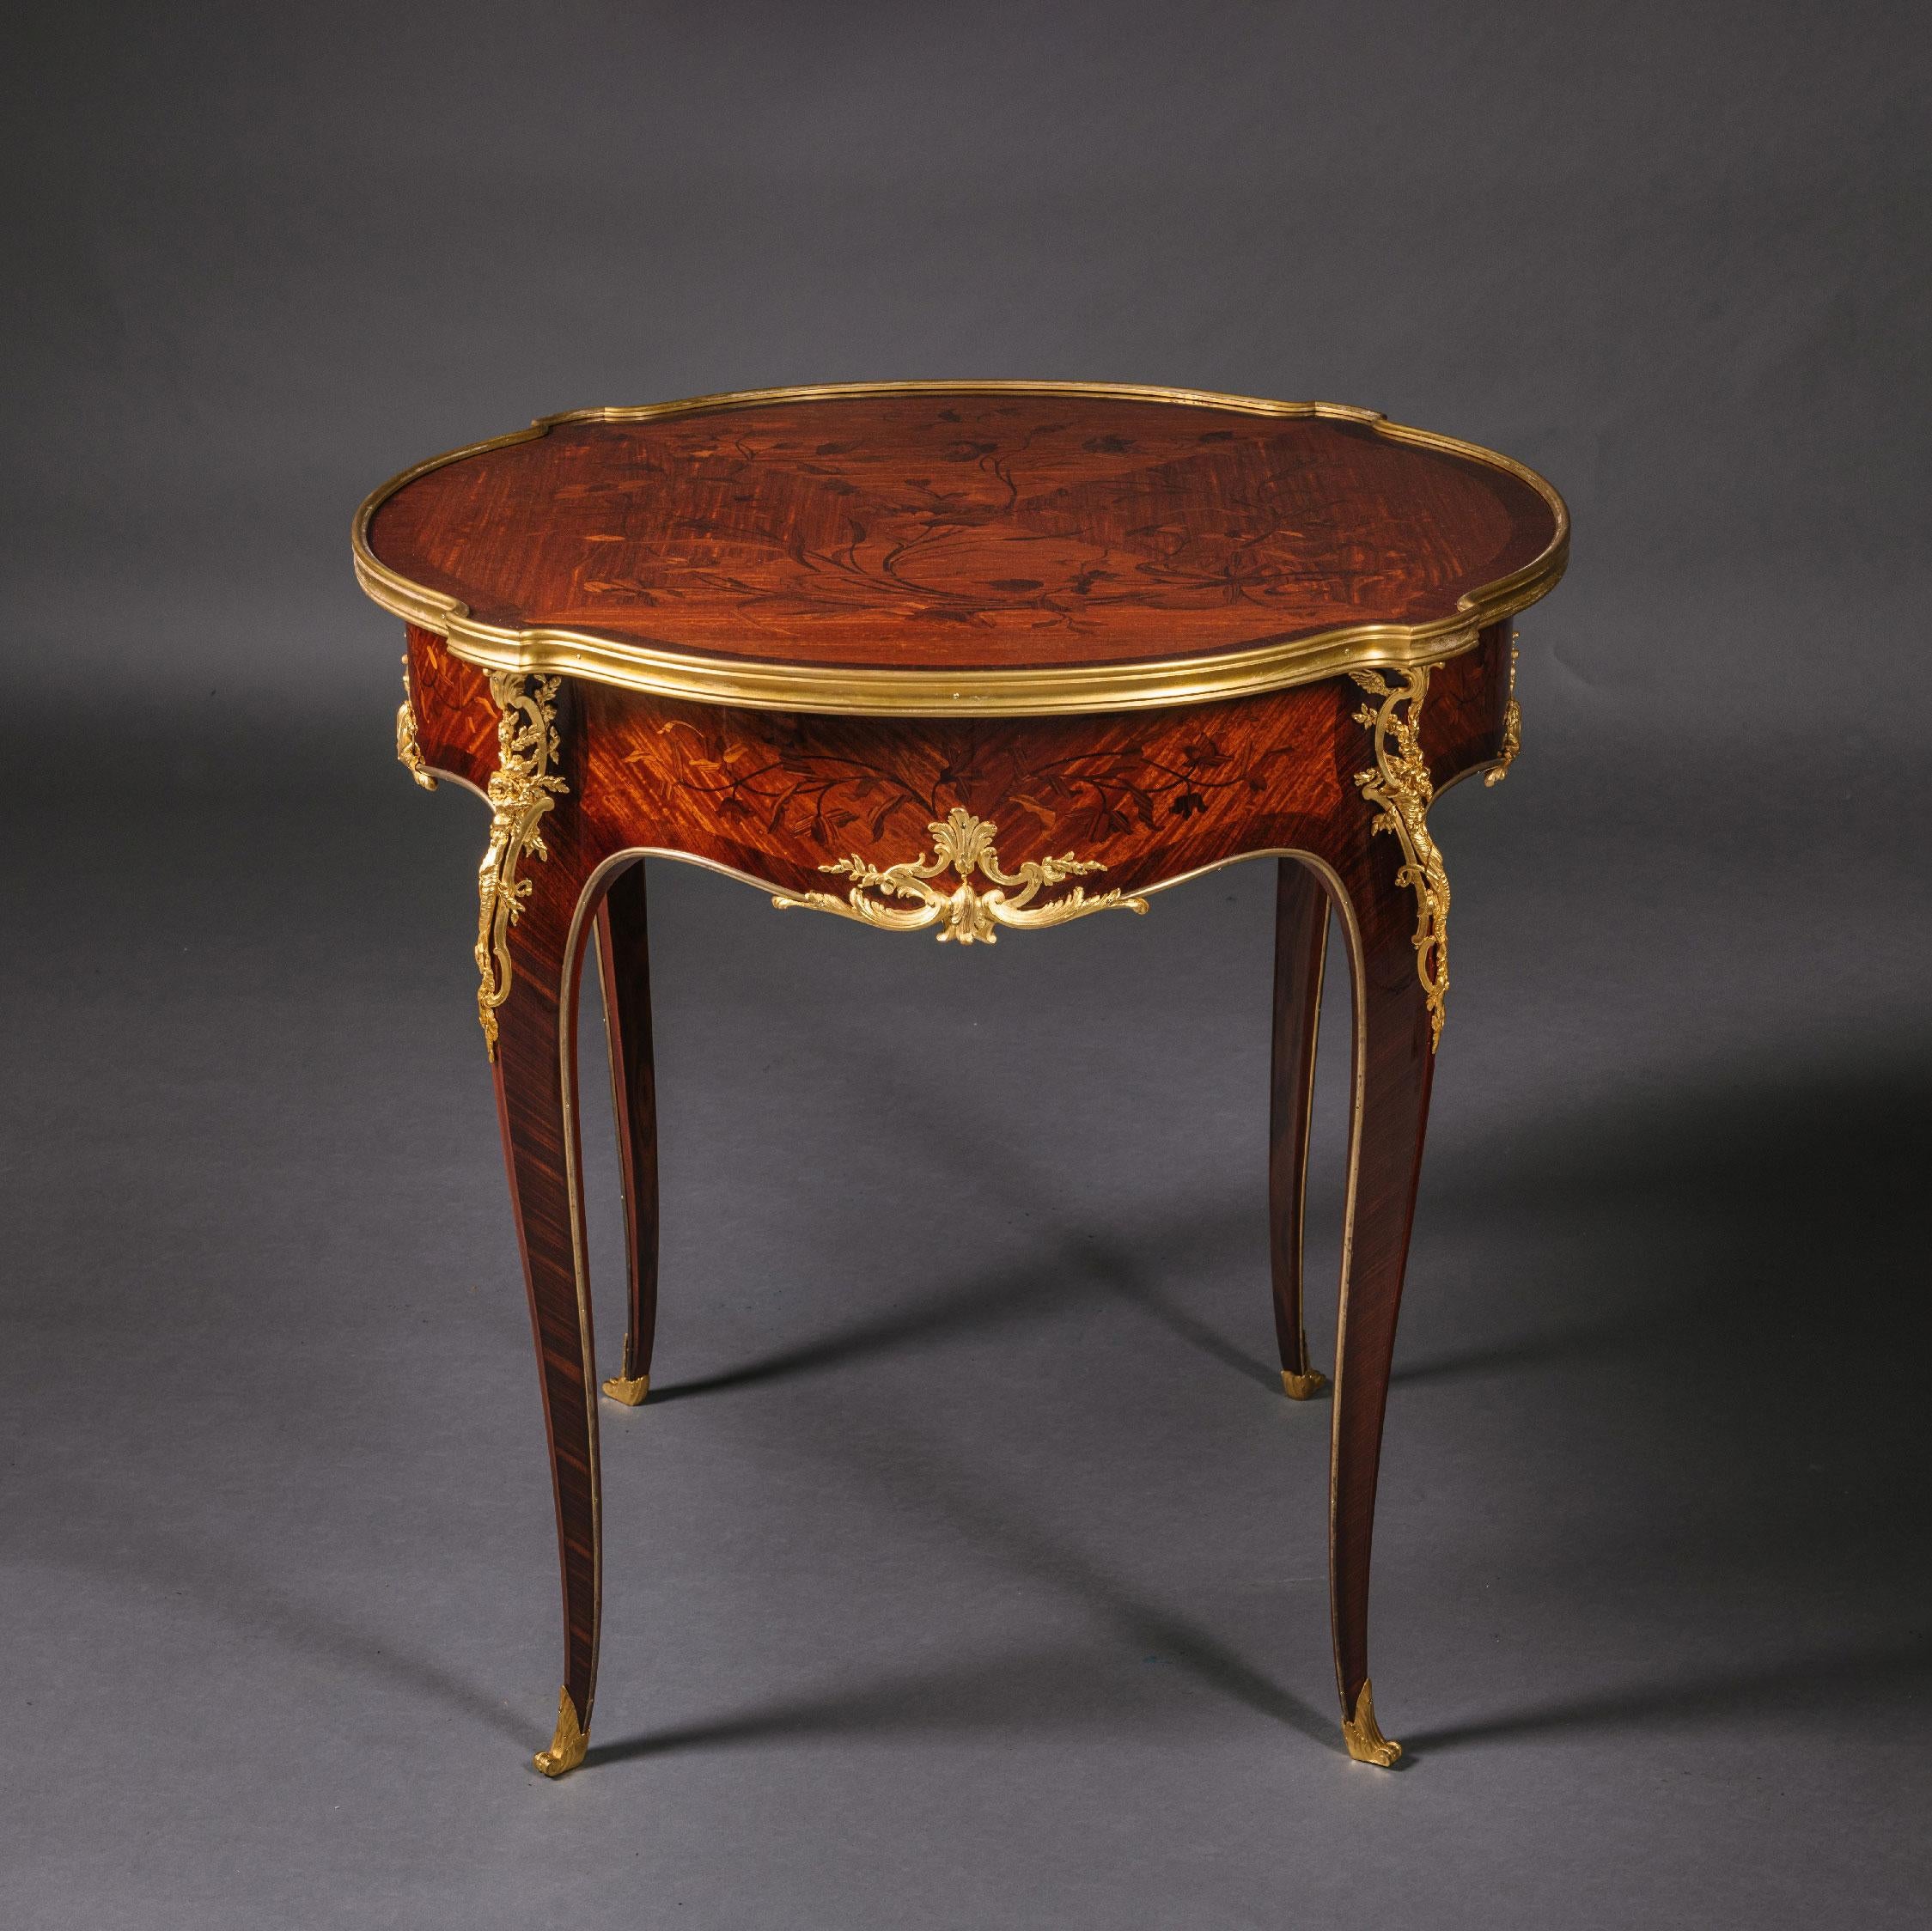 A gilt-bronze Marquetry Inlaid Gueridon, attributed to Emmanuel Zwiener.

This large gueridon or occasional table has a beautiful quarter veneered top which is inlaid with flower sprays. The frieze has conforming marquetry and is centred to each